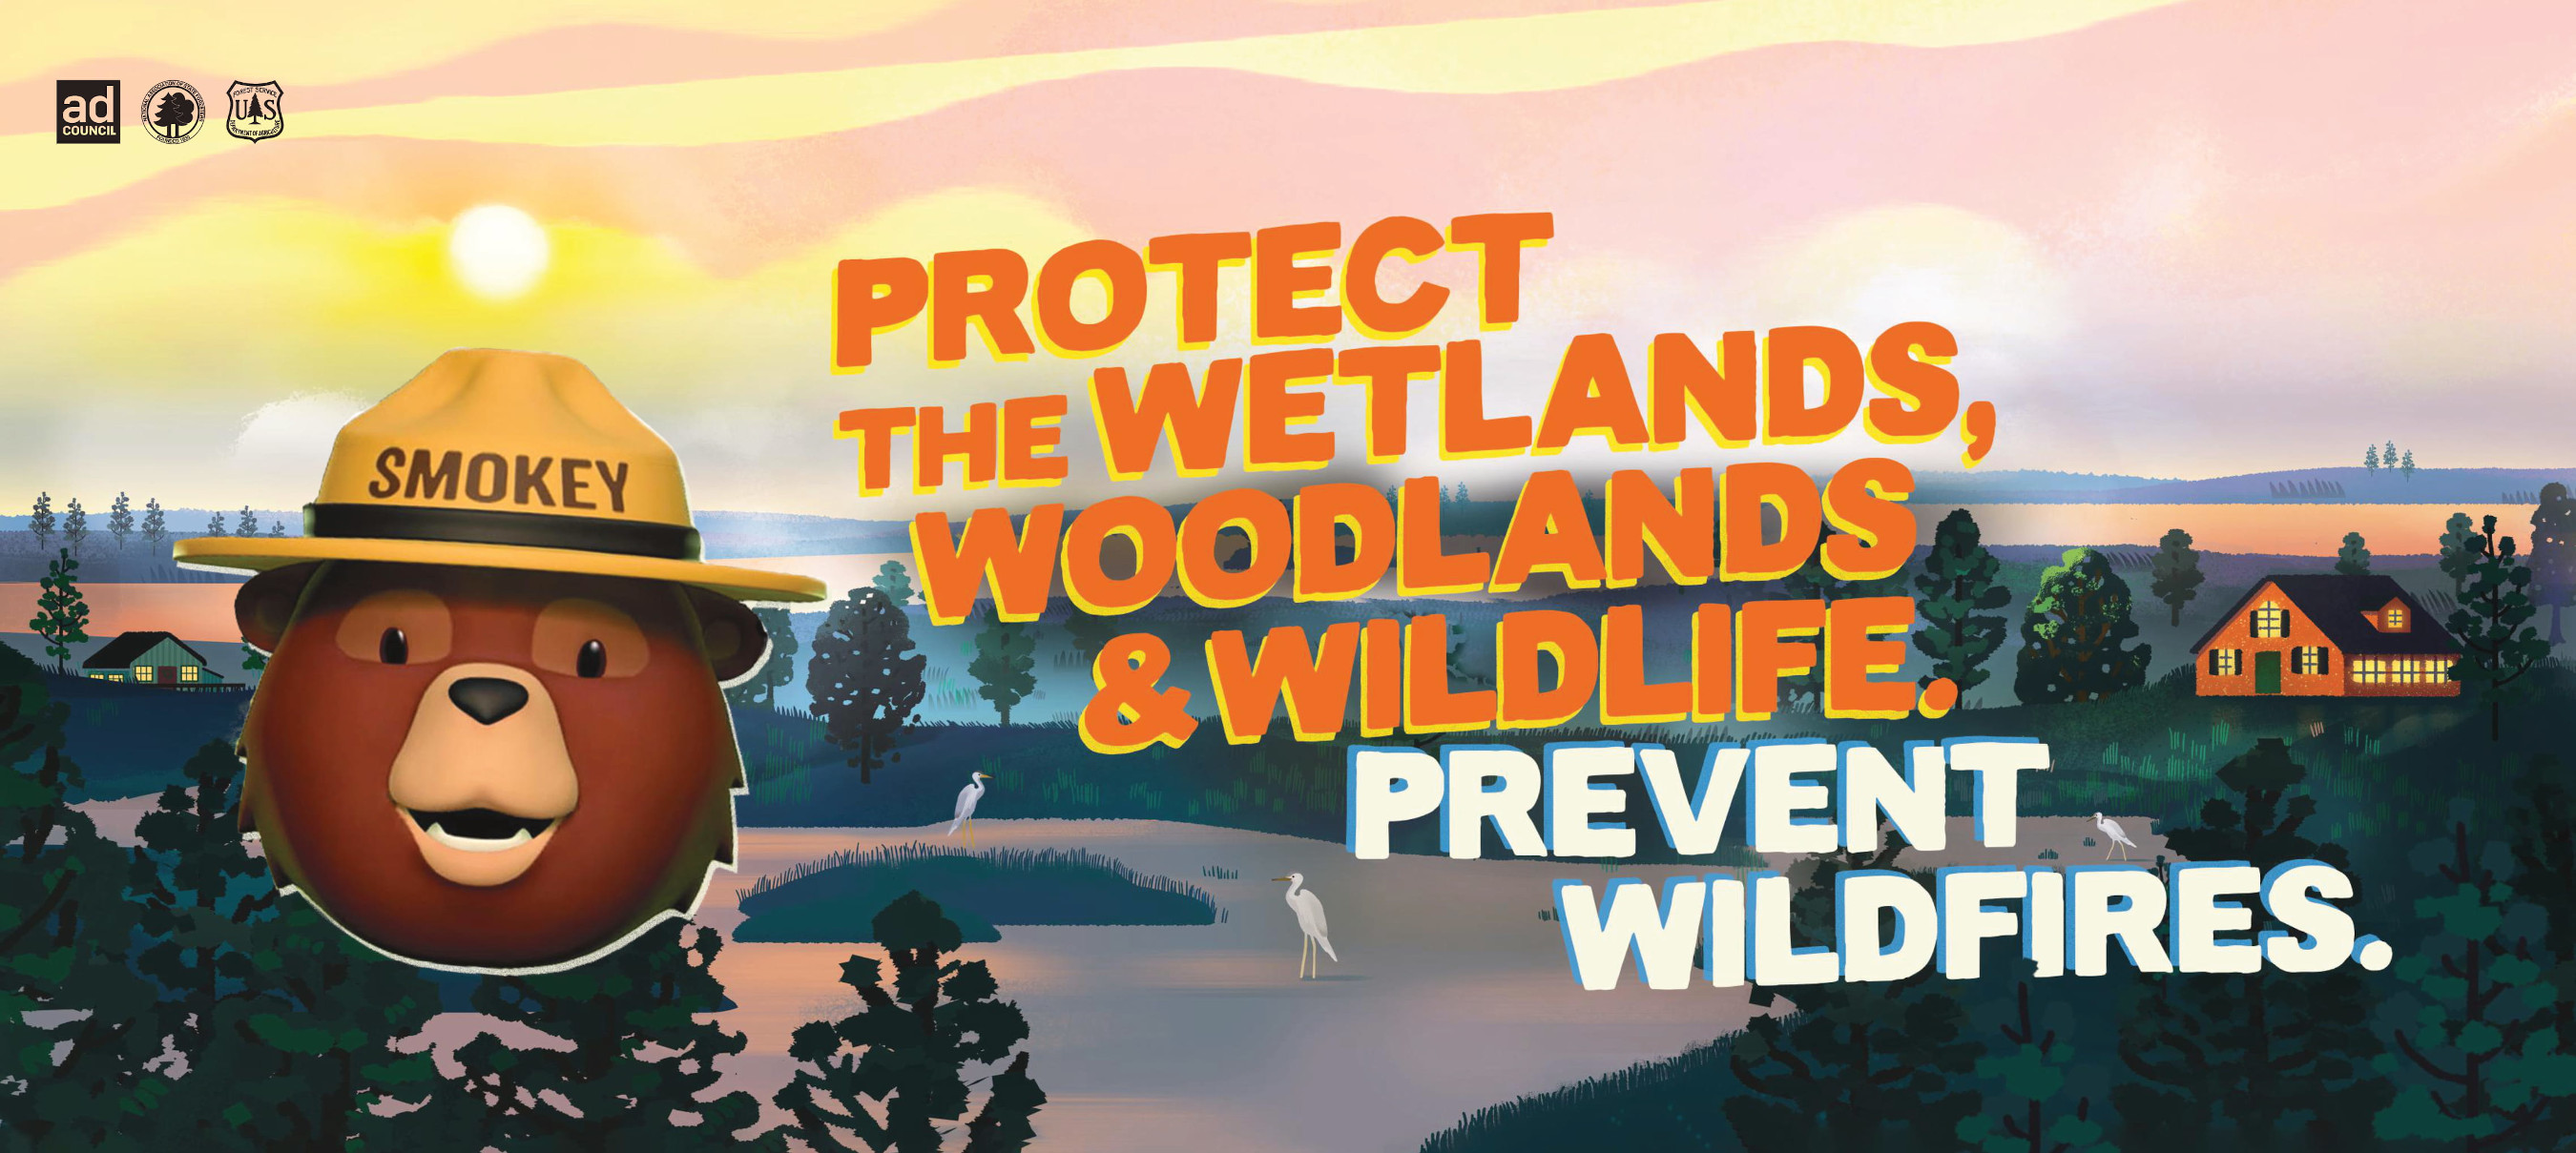 Smokey Bear OOH for the Southeast Wetlands | Wildfire Prevention | Ad Council